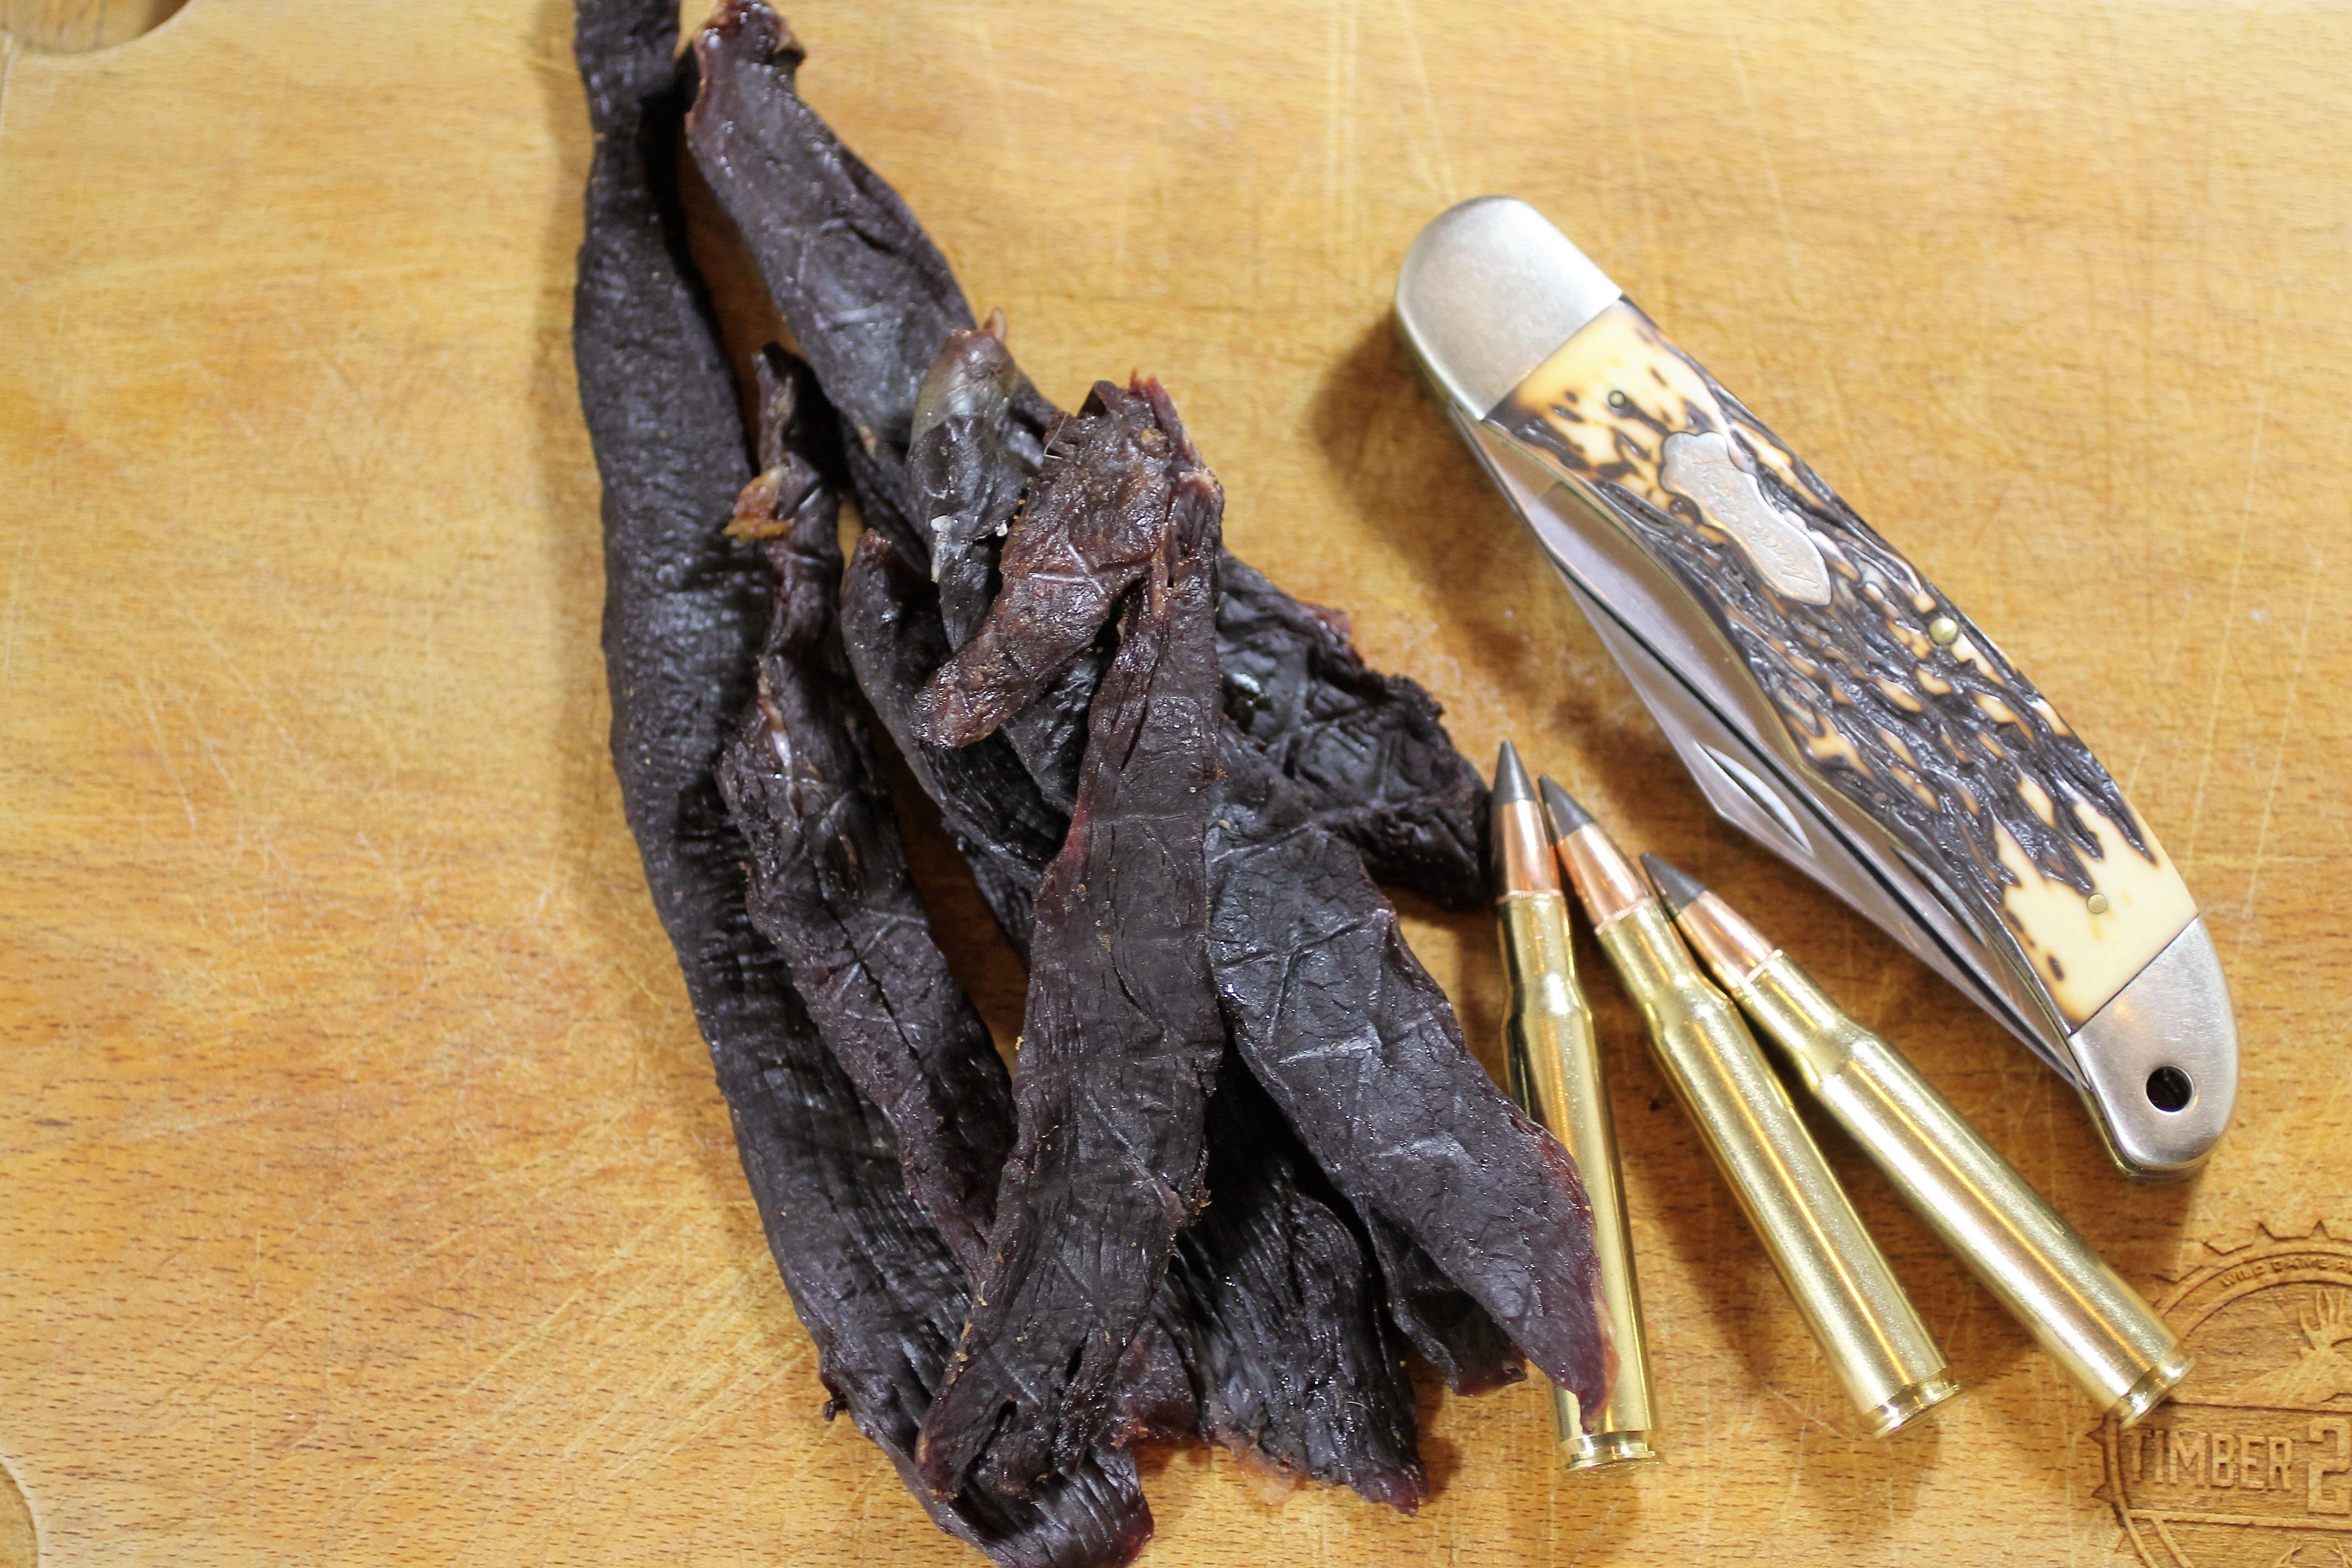 A handful of jerky will keep hunger at bay on an all day hunt.